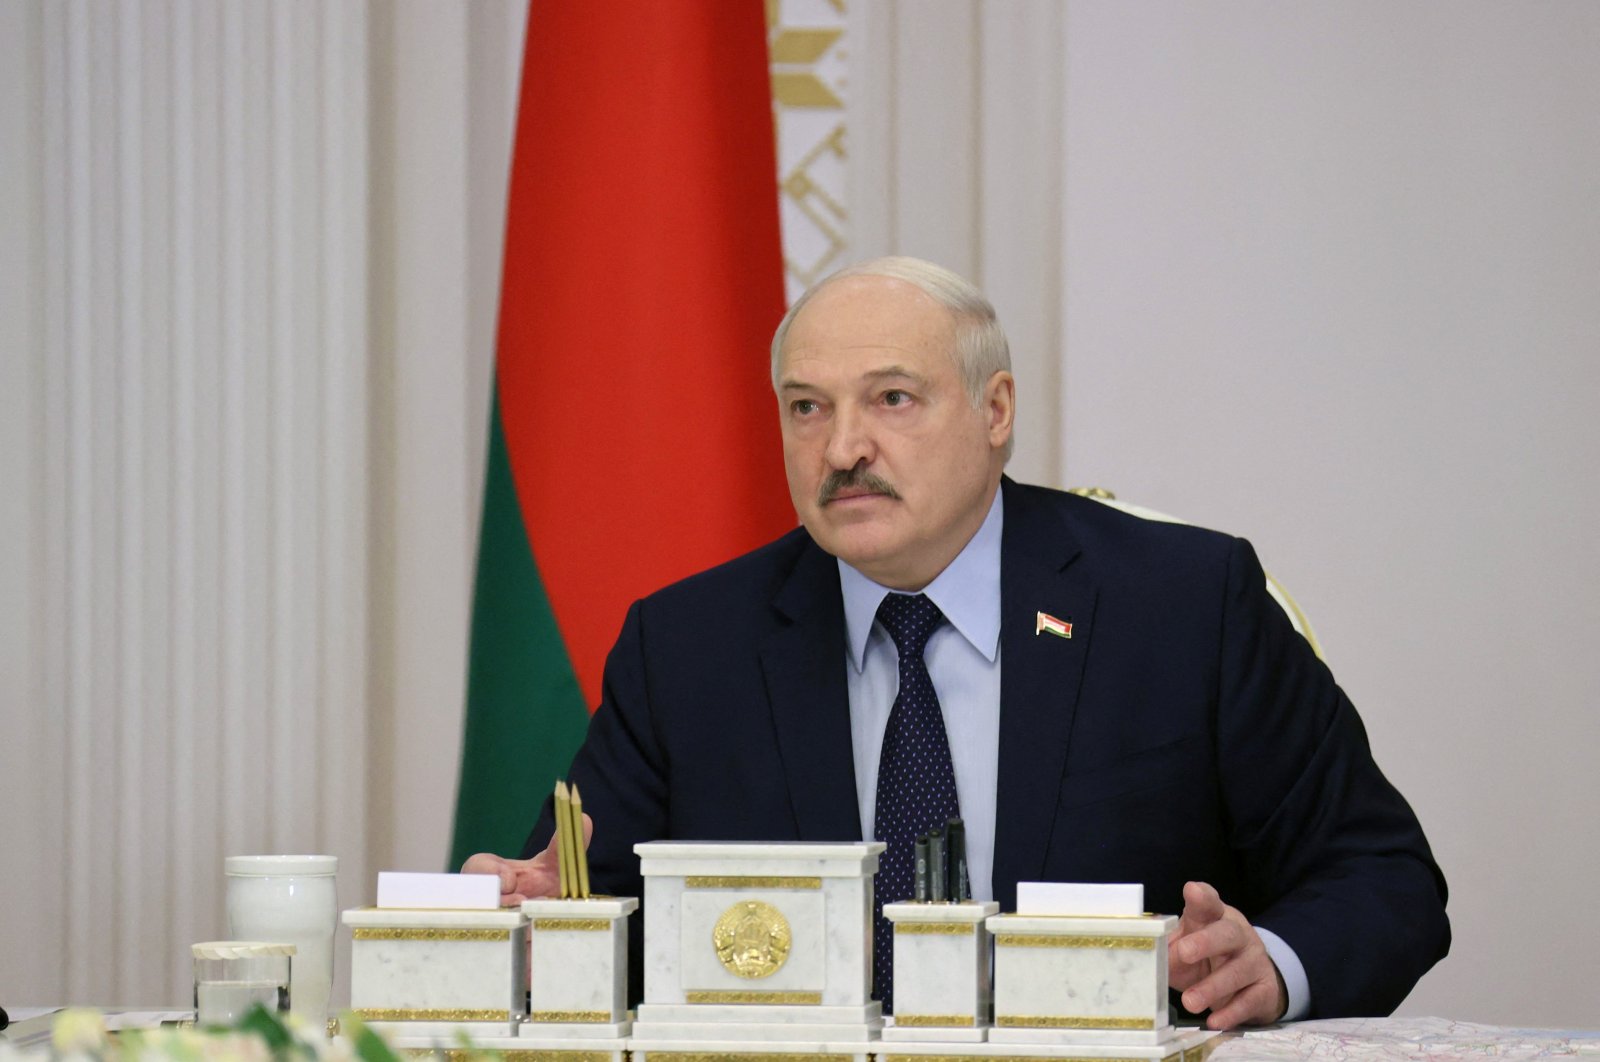 Belarusian President Alexander Lukashenko chairs a meeting with military officials in Minsk, Belarus, Feb. 24, 2022. (Reuters Photo)